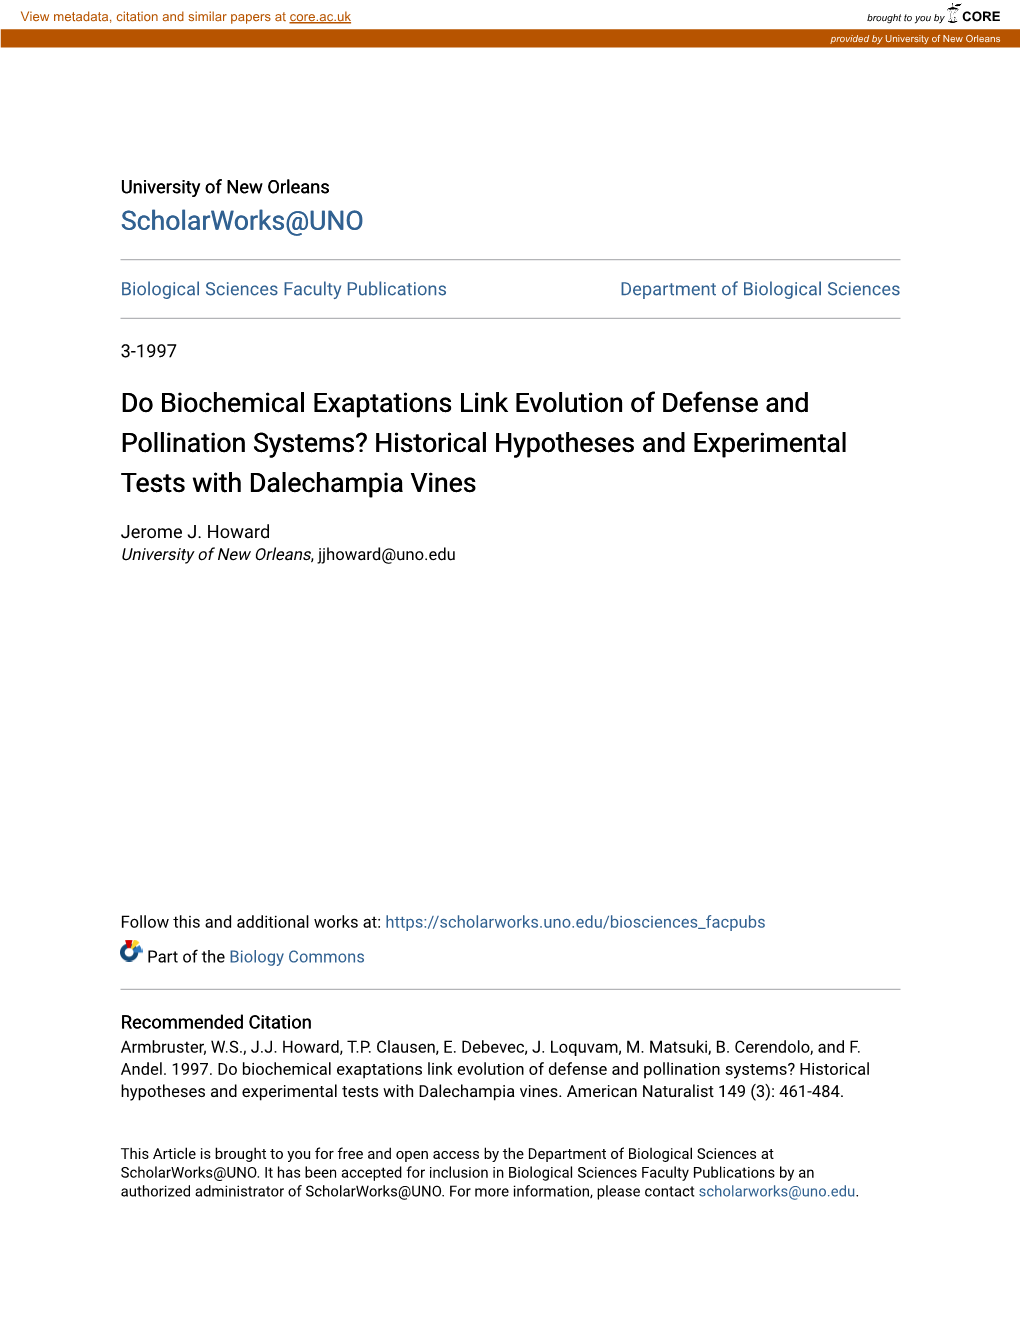 Do Biochemical Exaptations Link Evolution of Defense and Pollination Systems? Historical Hypotheses and Experimental Tests with Dalechampia Vines